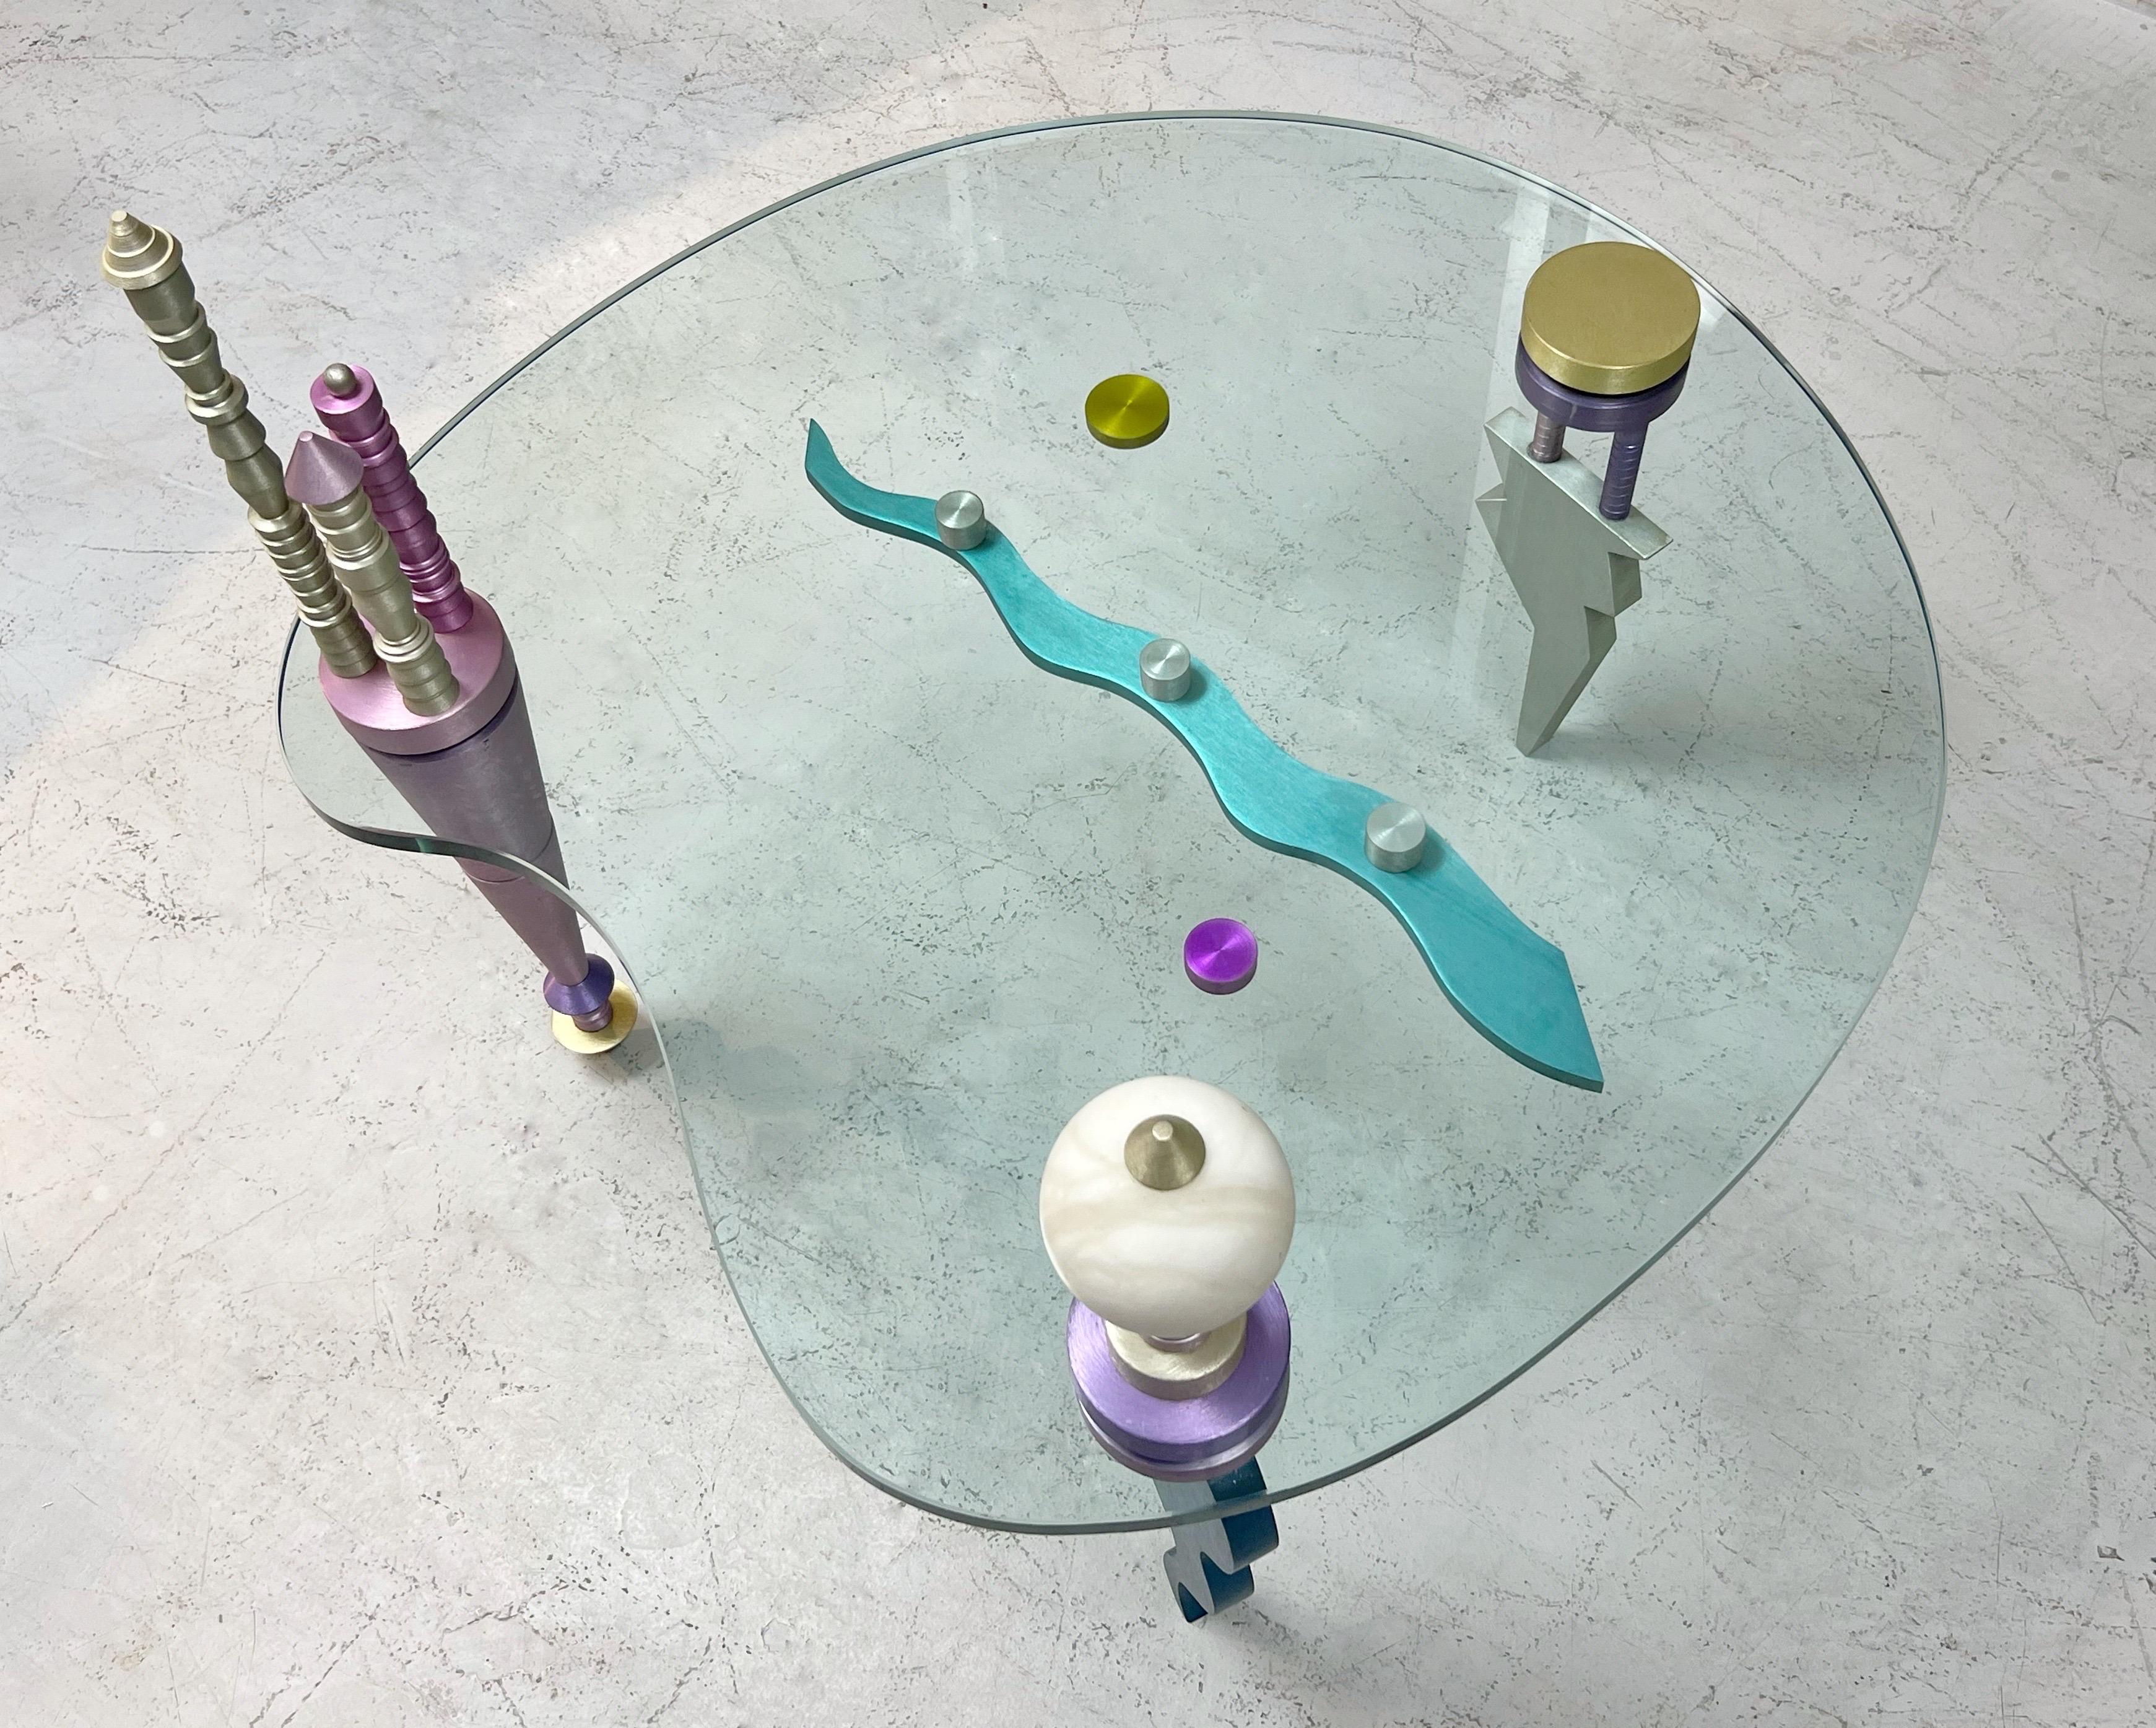 A unique coffee or occasional table. Free from glass with colorful anodized aluminum legs and finials. The metal elements are highly sculptural.